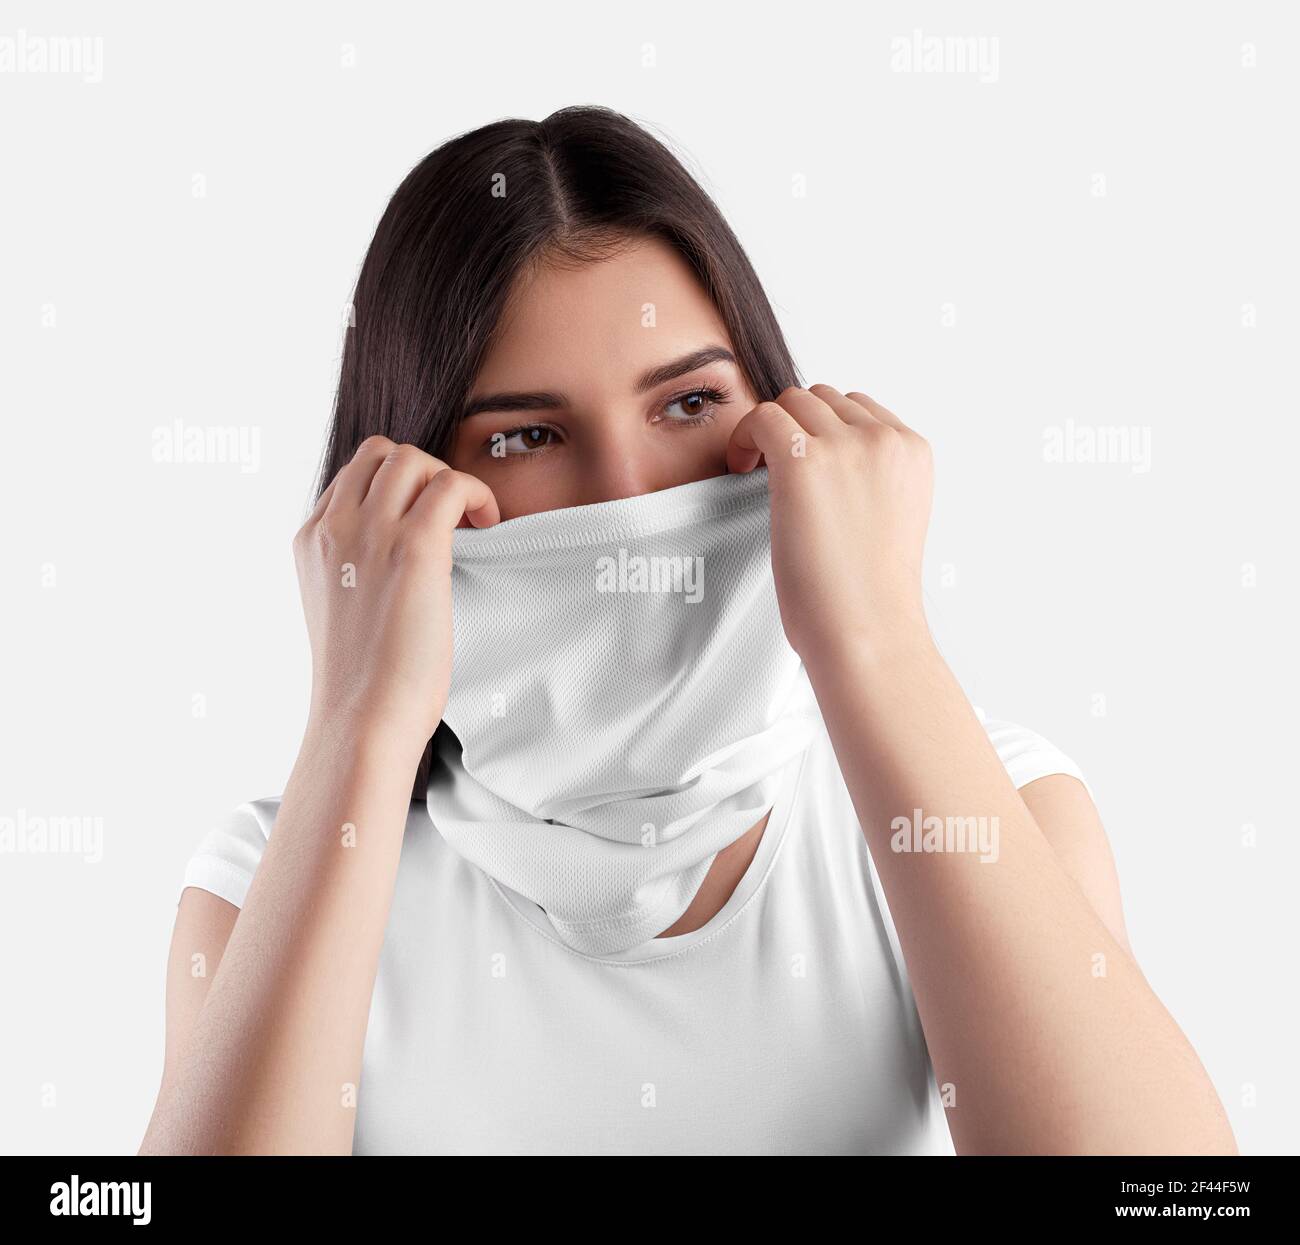 Download Mockup White Texture Buff On A Young Girl With Dark Hair Straightening A Blank Half Mask For A Design Presentation Cloth Kerchief Template Covering Stock Photo Alamy